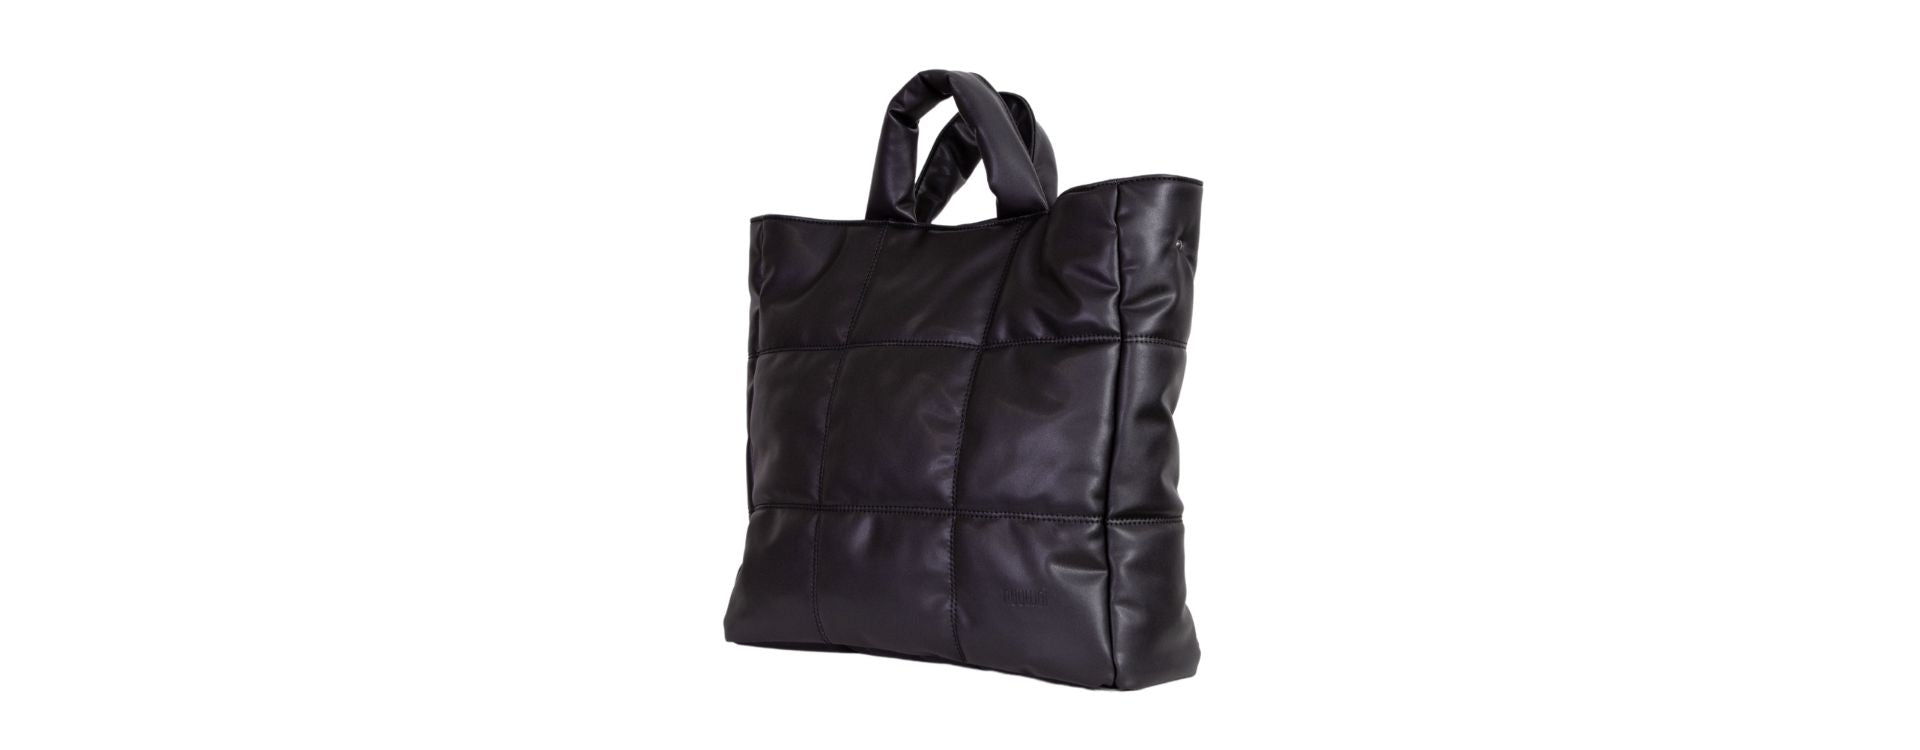 Vegan and sustainable pillow bag Linn from nuuwai in quilted deep black